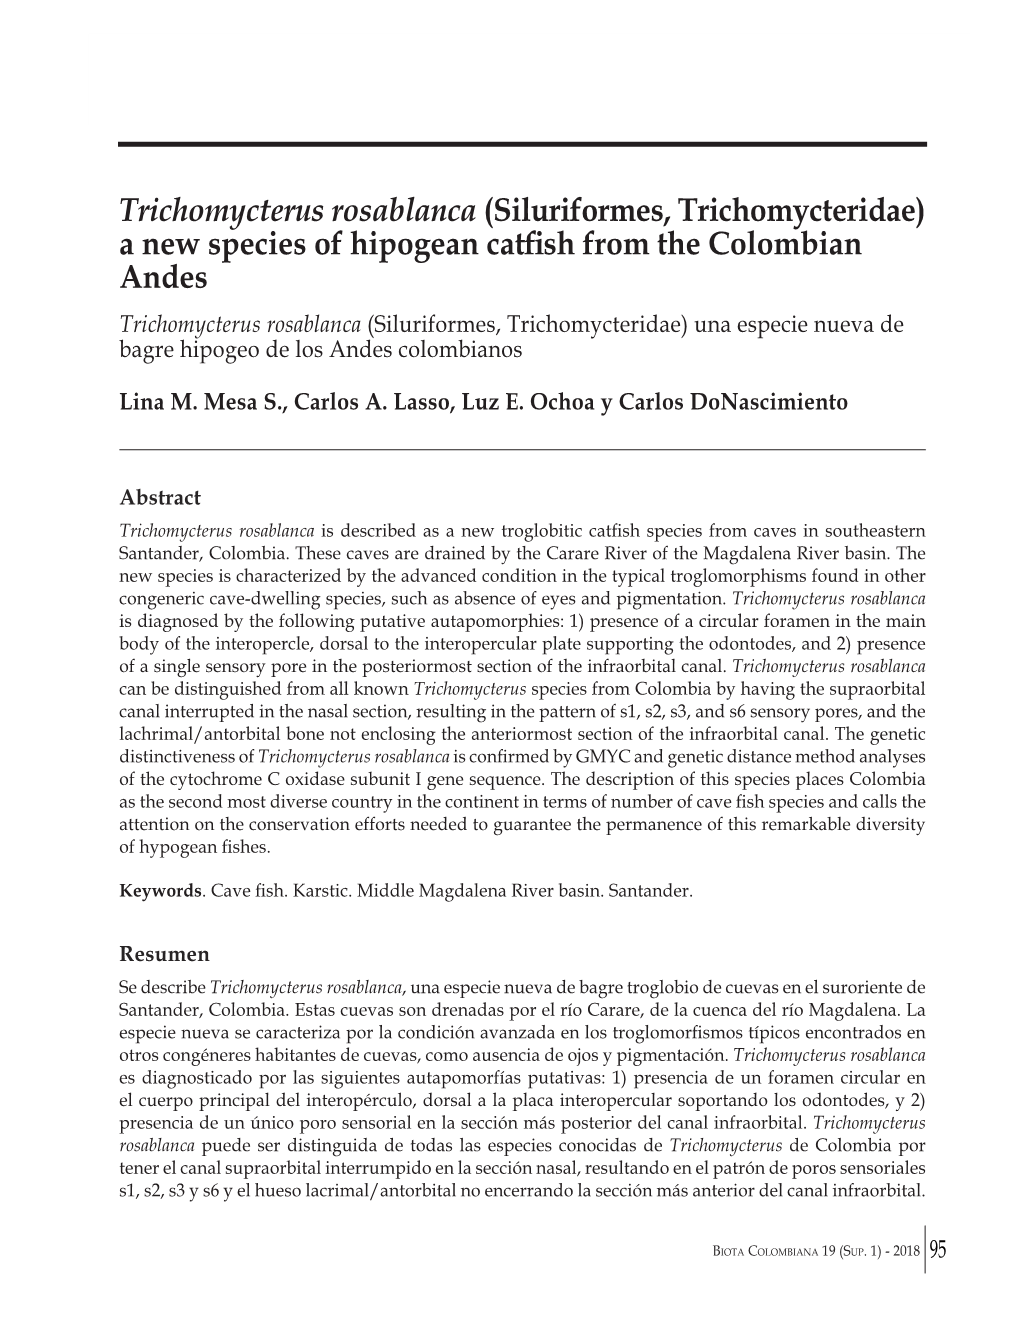 Trichomycterus Rosablanca (Siluriformes, Trichomycteridae) a New Species of Hipogean Catfish from the Colombian Andes